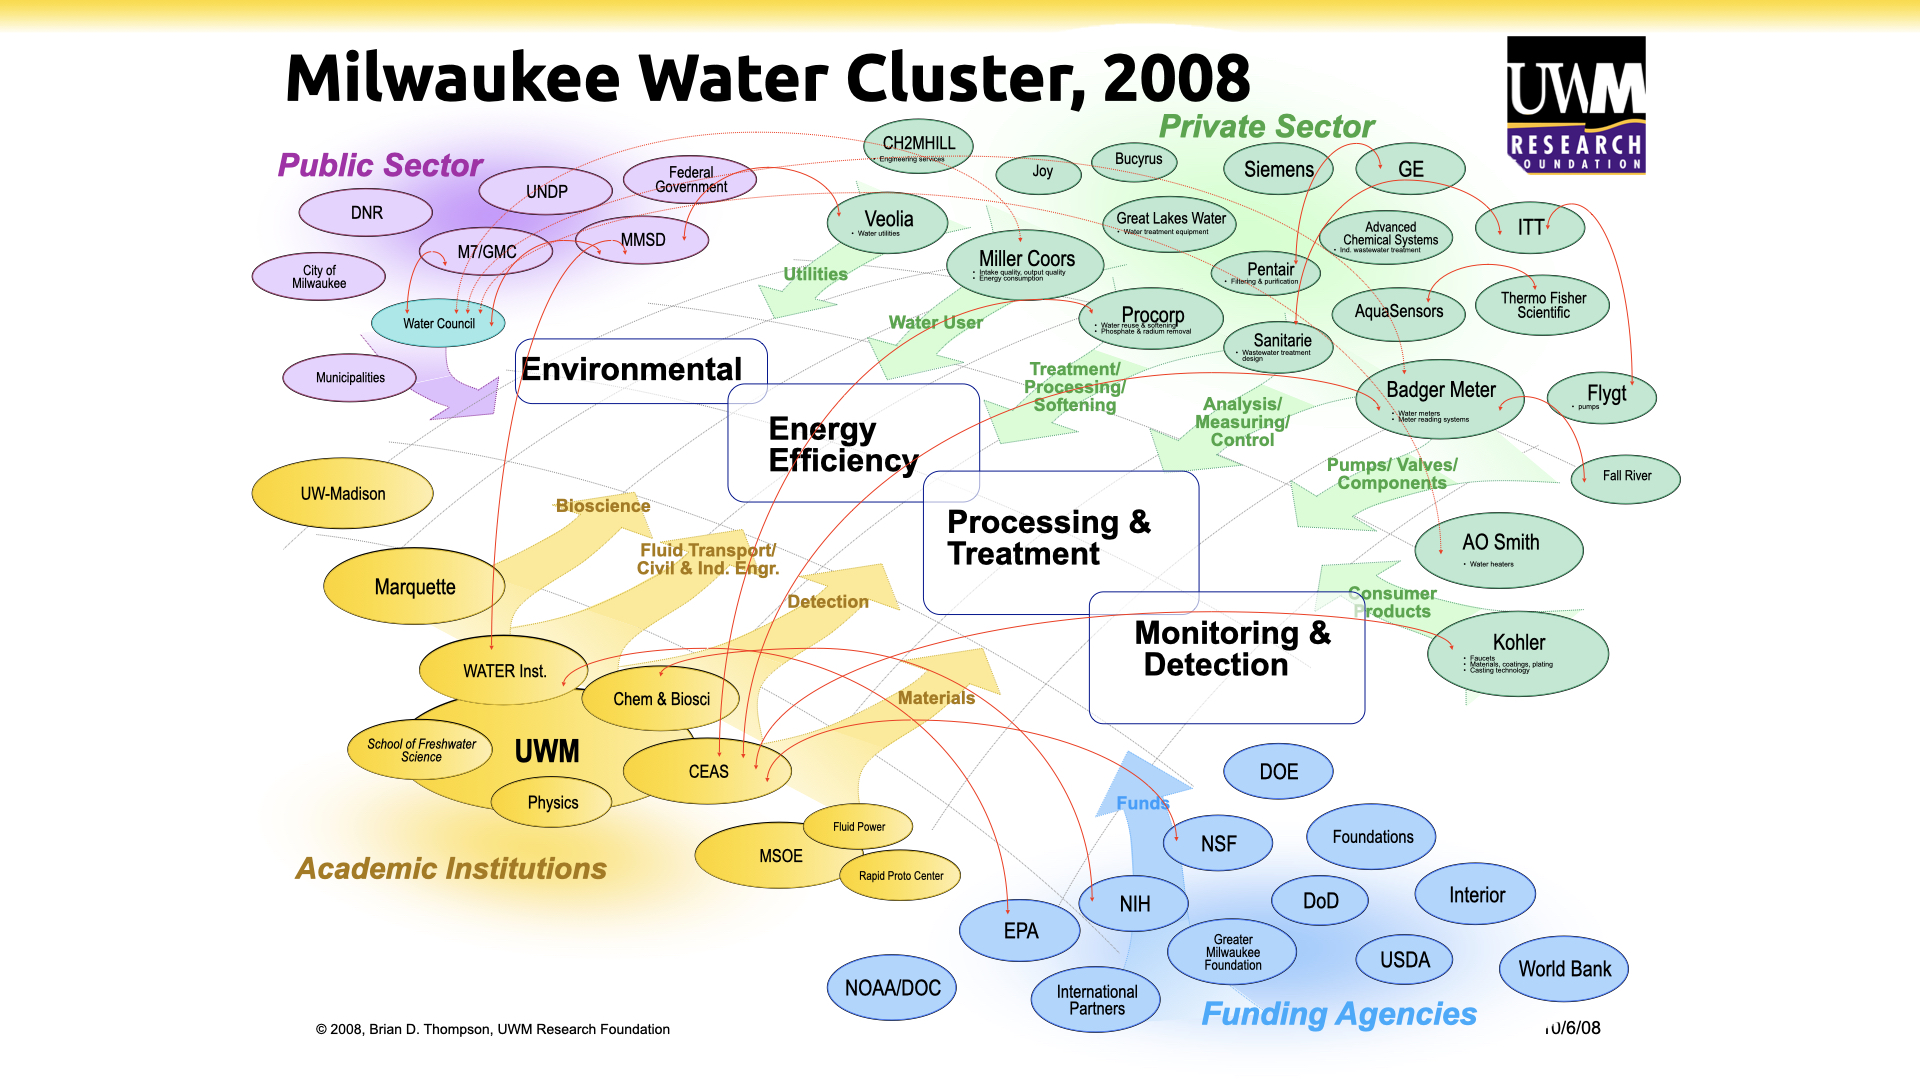 2008: Global Water Hub Launched